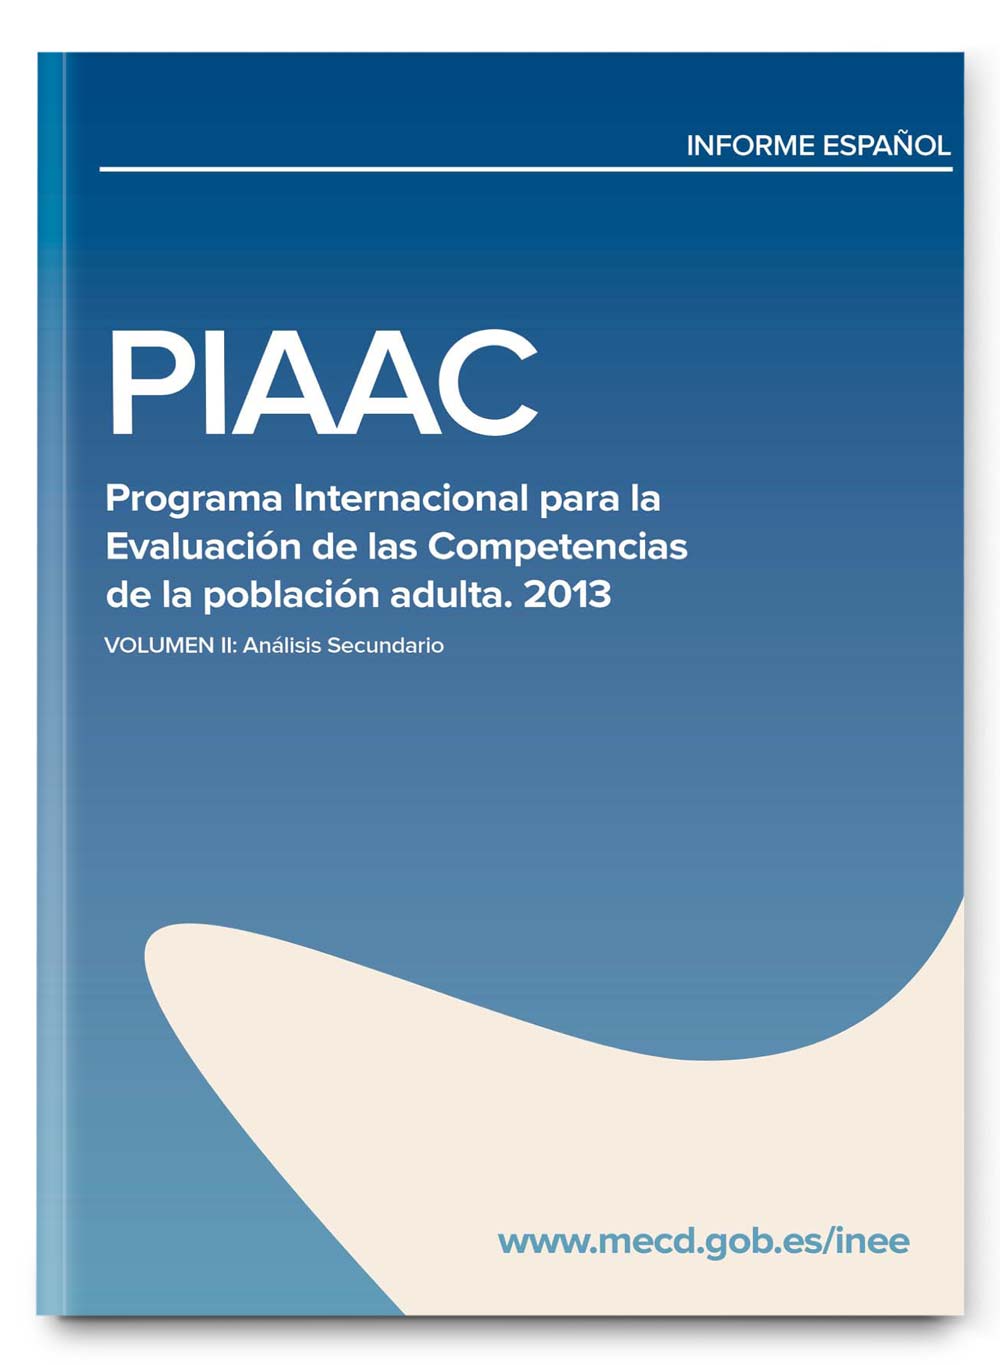 Analysis of the PIACC Survey for Spain